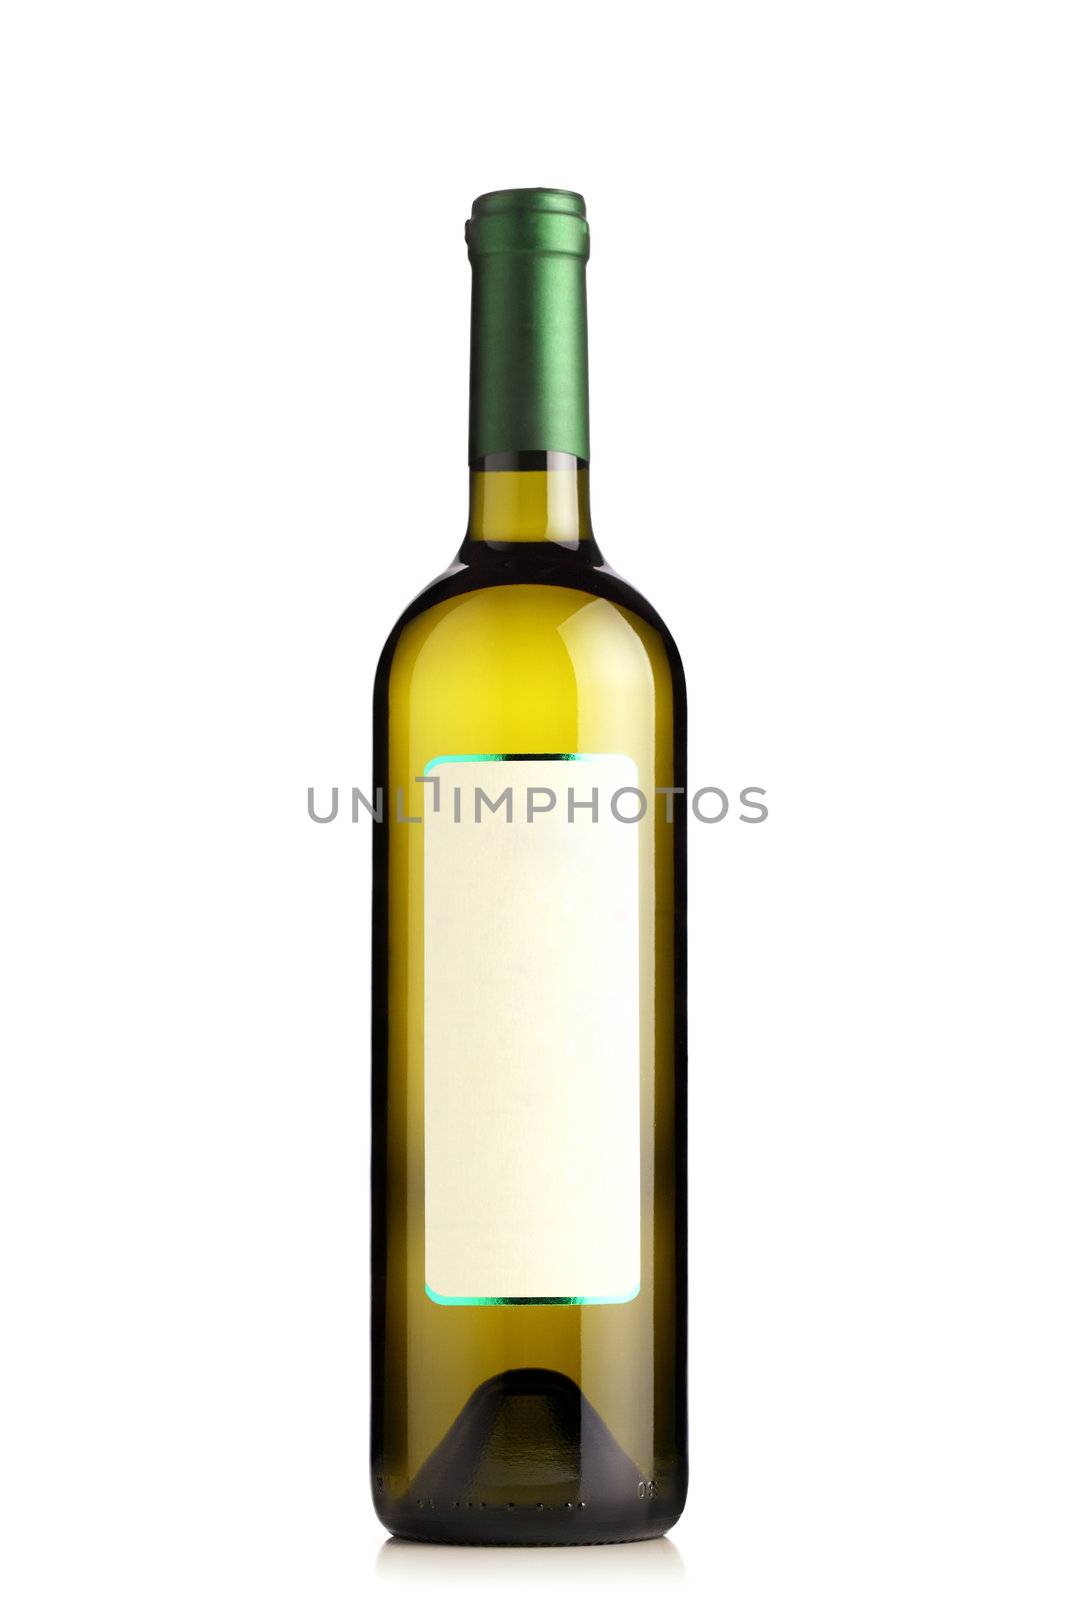 white wine bottle with green label against white background